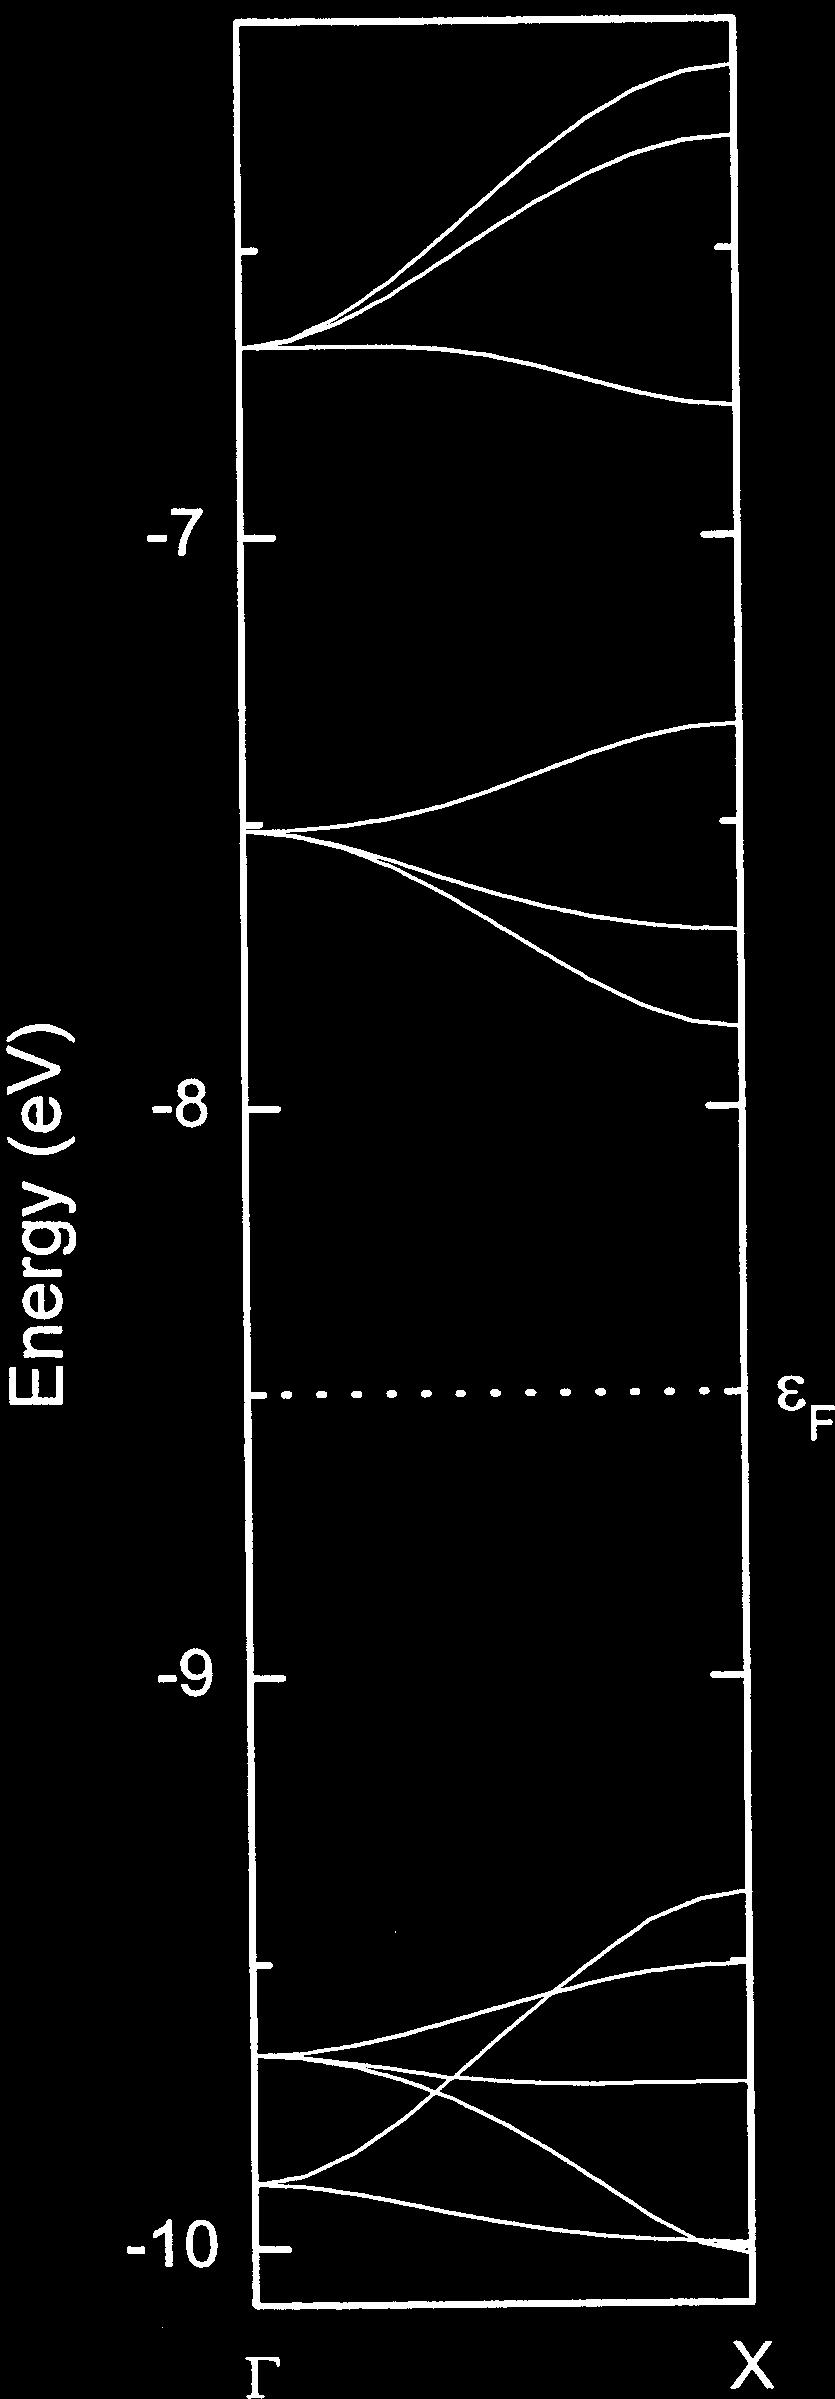 larger than those in the solution phase material. The dispersions Figure 9. Electronic structure of the valence and conduction bands of C 60 along X.